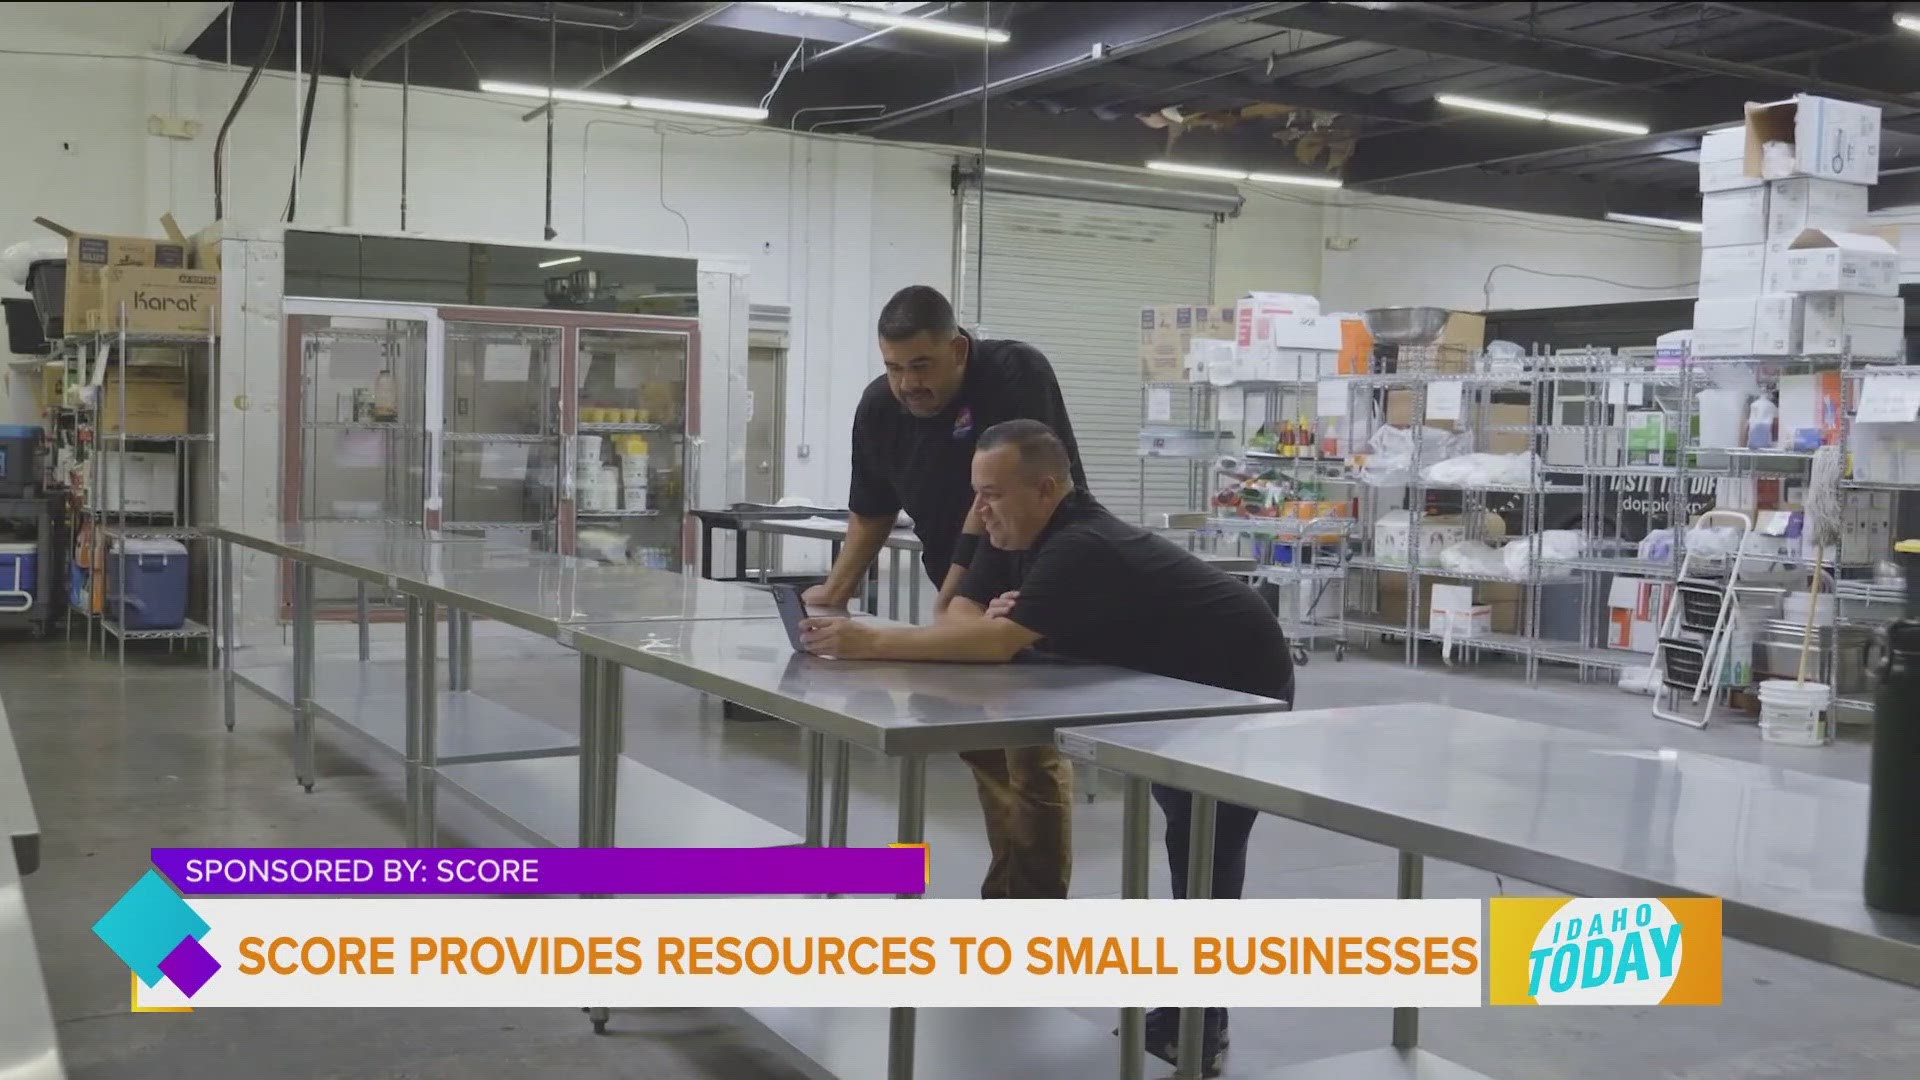 Sponsored by Score. Idaho Today’s Mellisa Paul gives the details on free resources for Idaho Small Business with SCORE Treasure Valley.